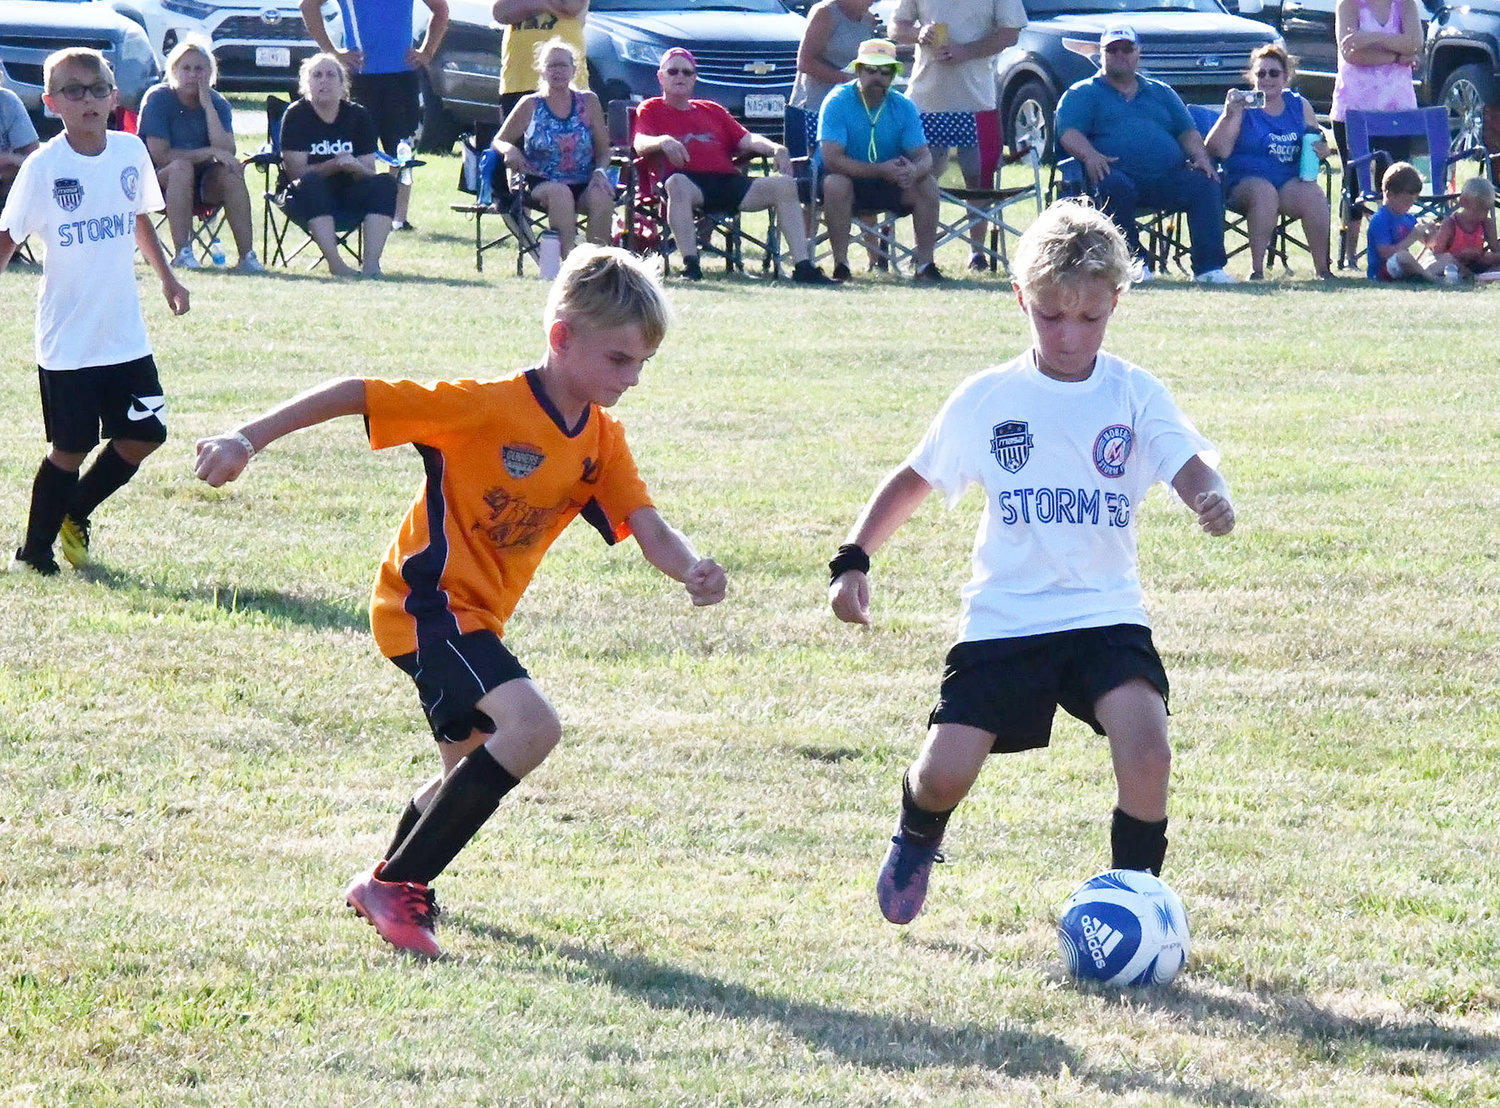 Storm 10-under soccer player Christian Doubrava tries to play keep away while teammate Seth Swartz looks on in the background.